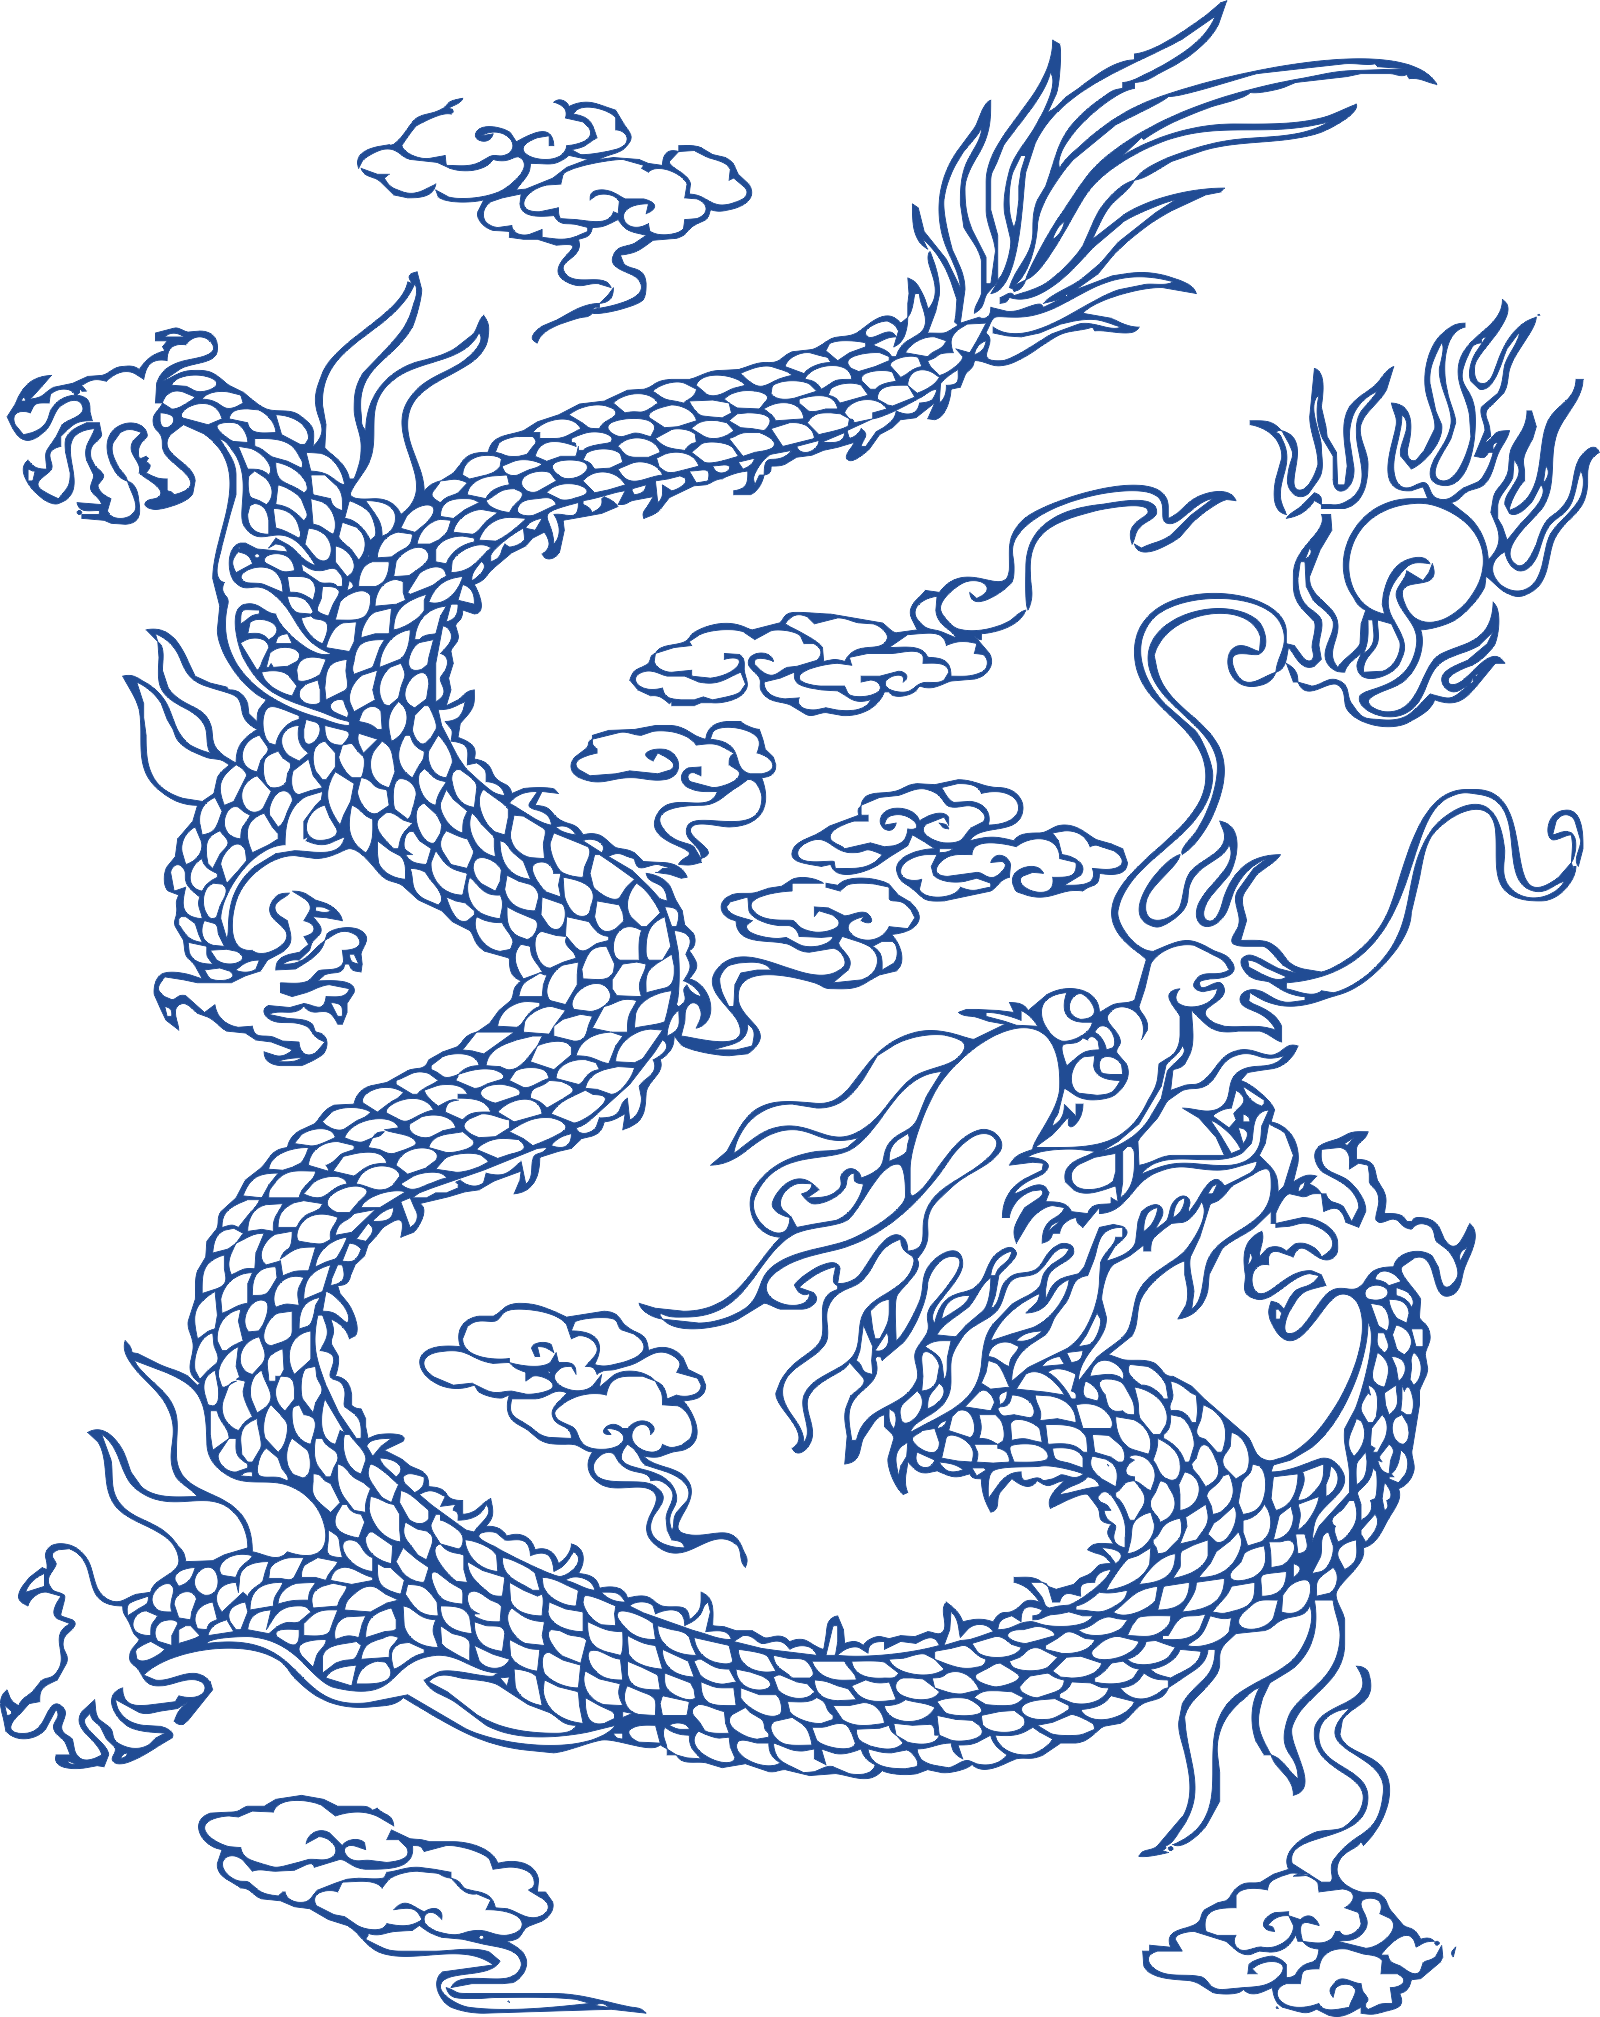 The Chinese loong carving patterns CorelDRAW Vectors CDR Free Download